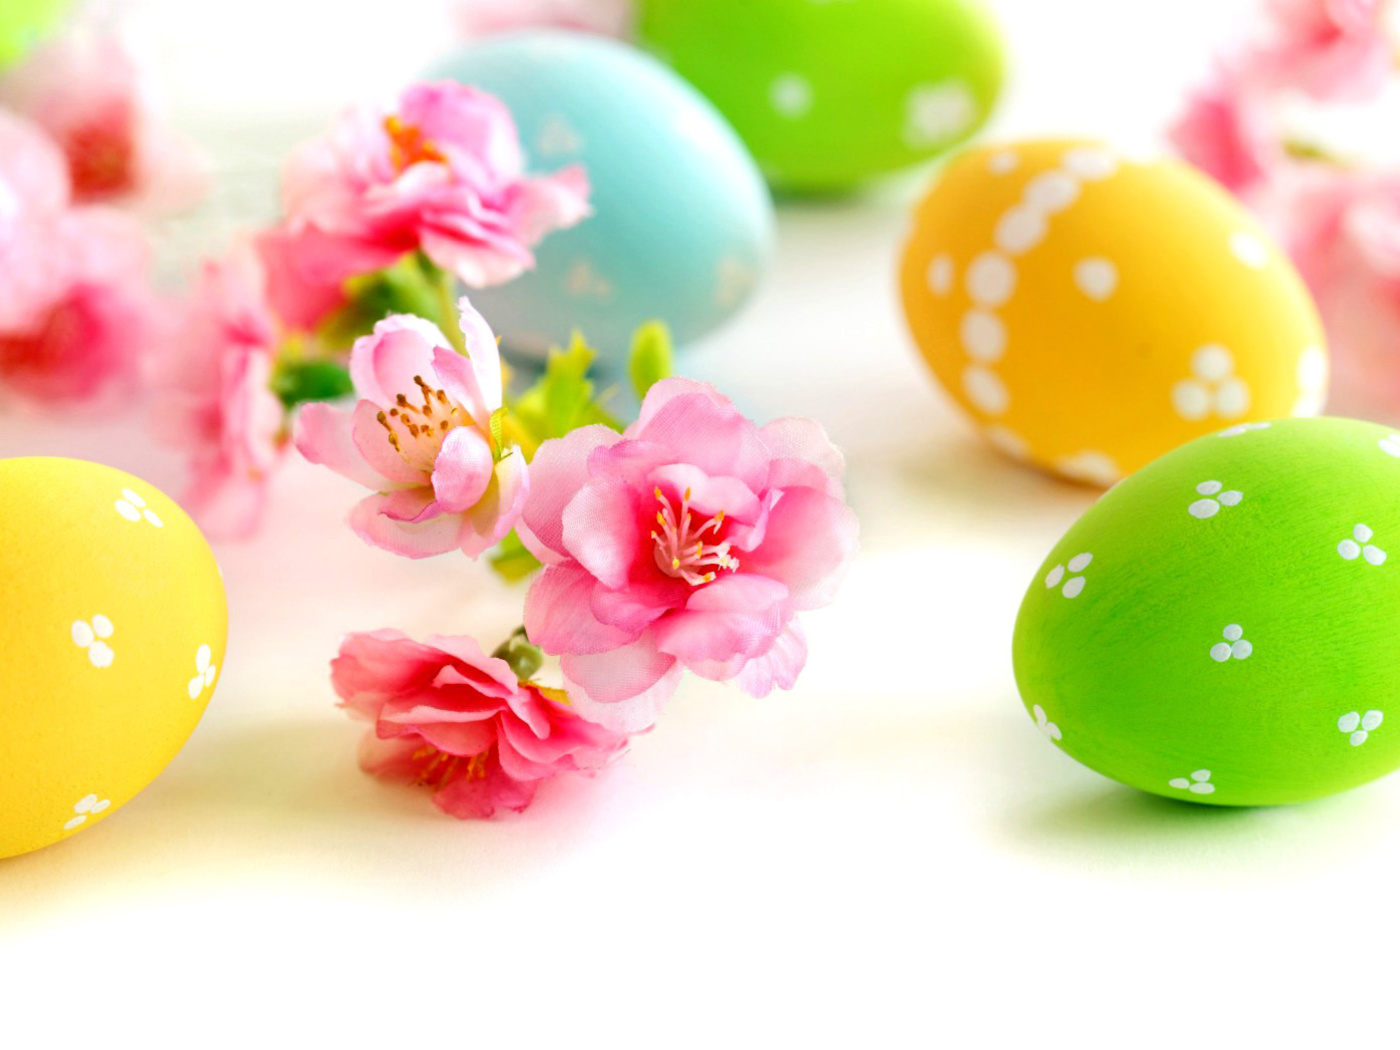 Das Easter Eggs and Spring Flowers Wallpaper 1400x1050